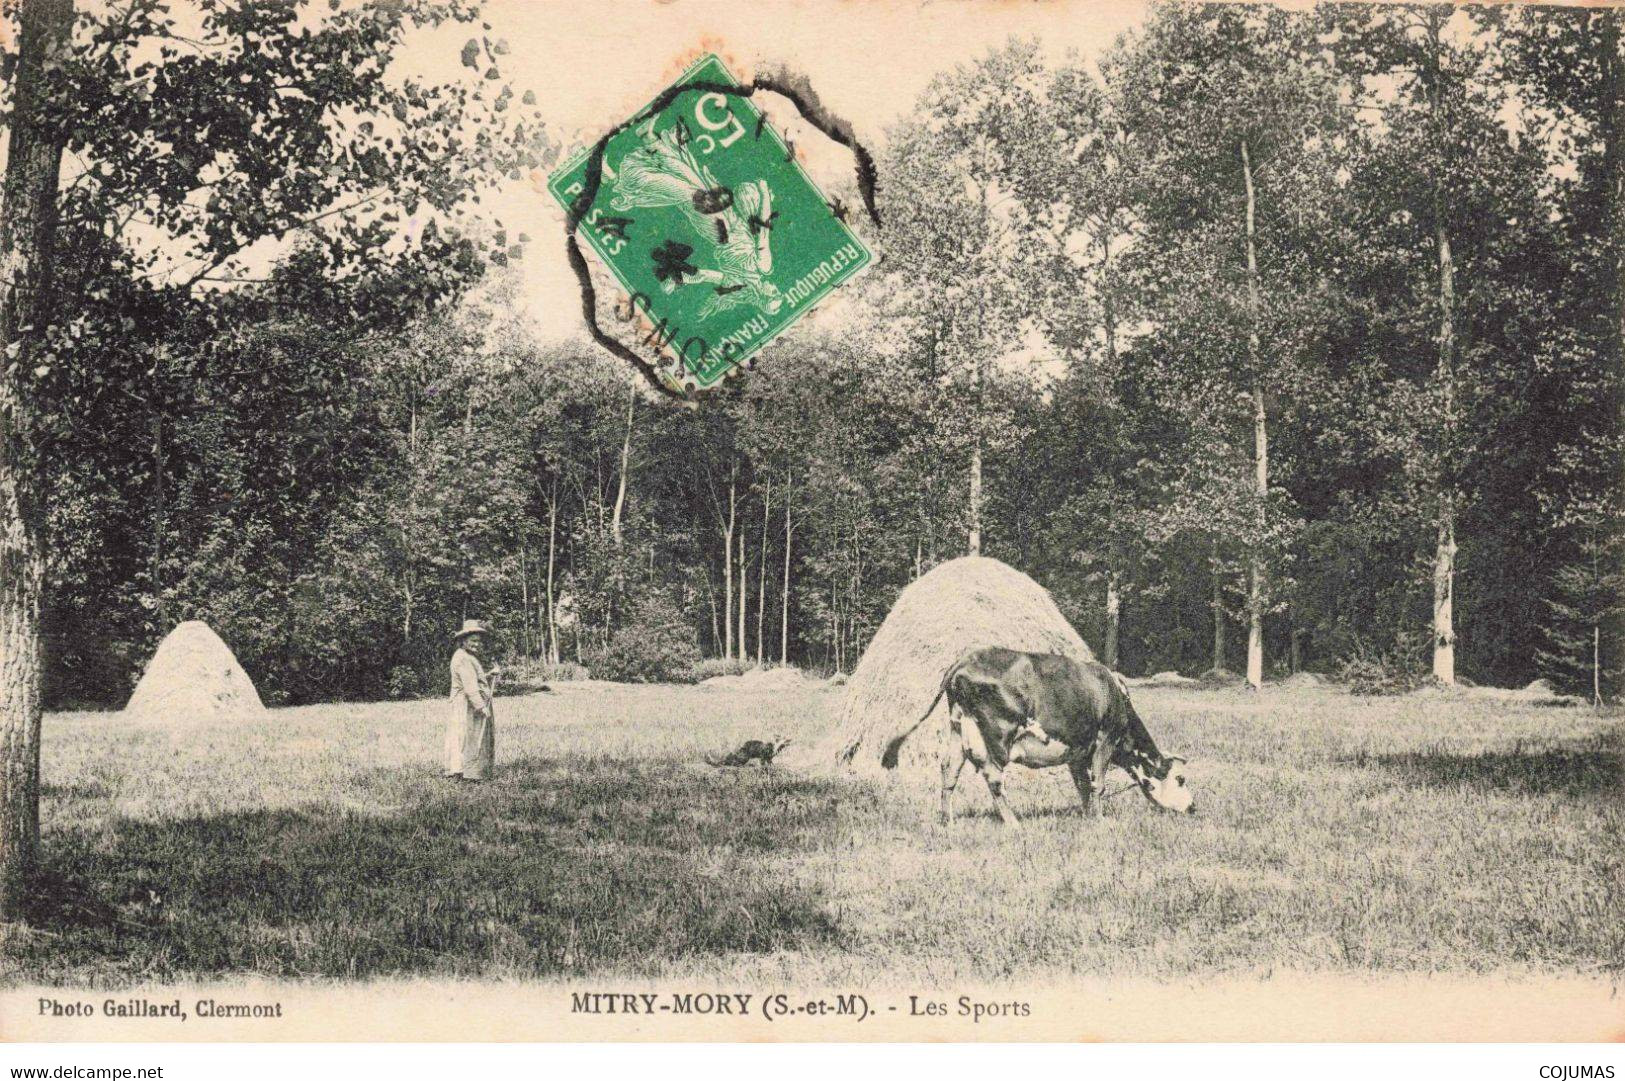 77 - MITRY MORY - S01233 - Les Sports - Vaches - Agriculture - L1 - Mitry Mory